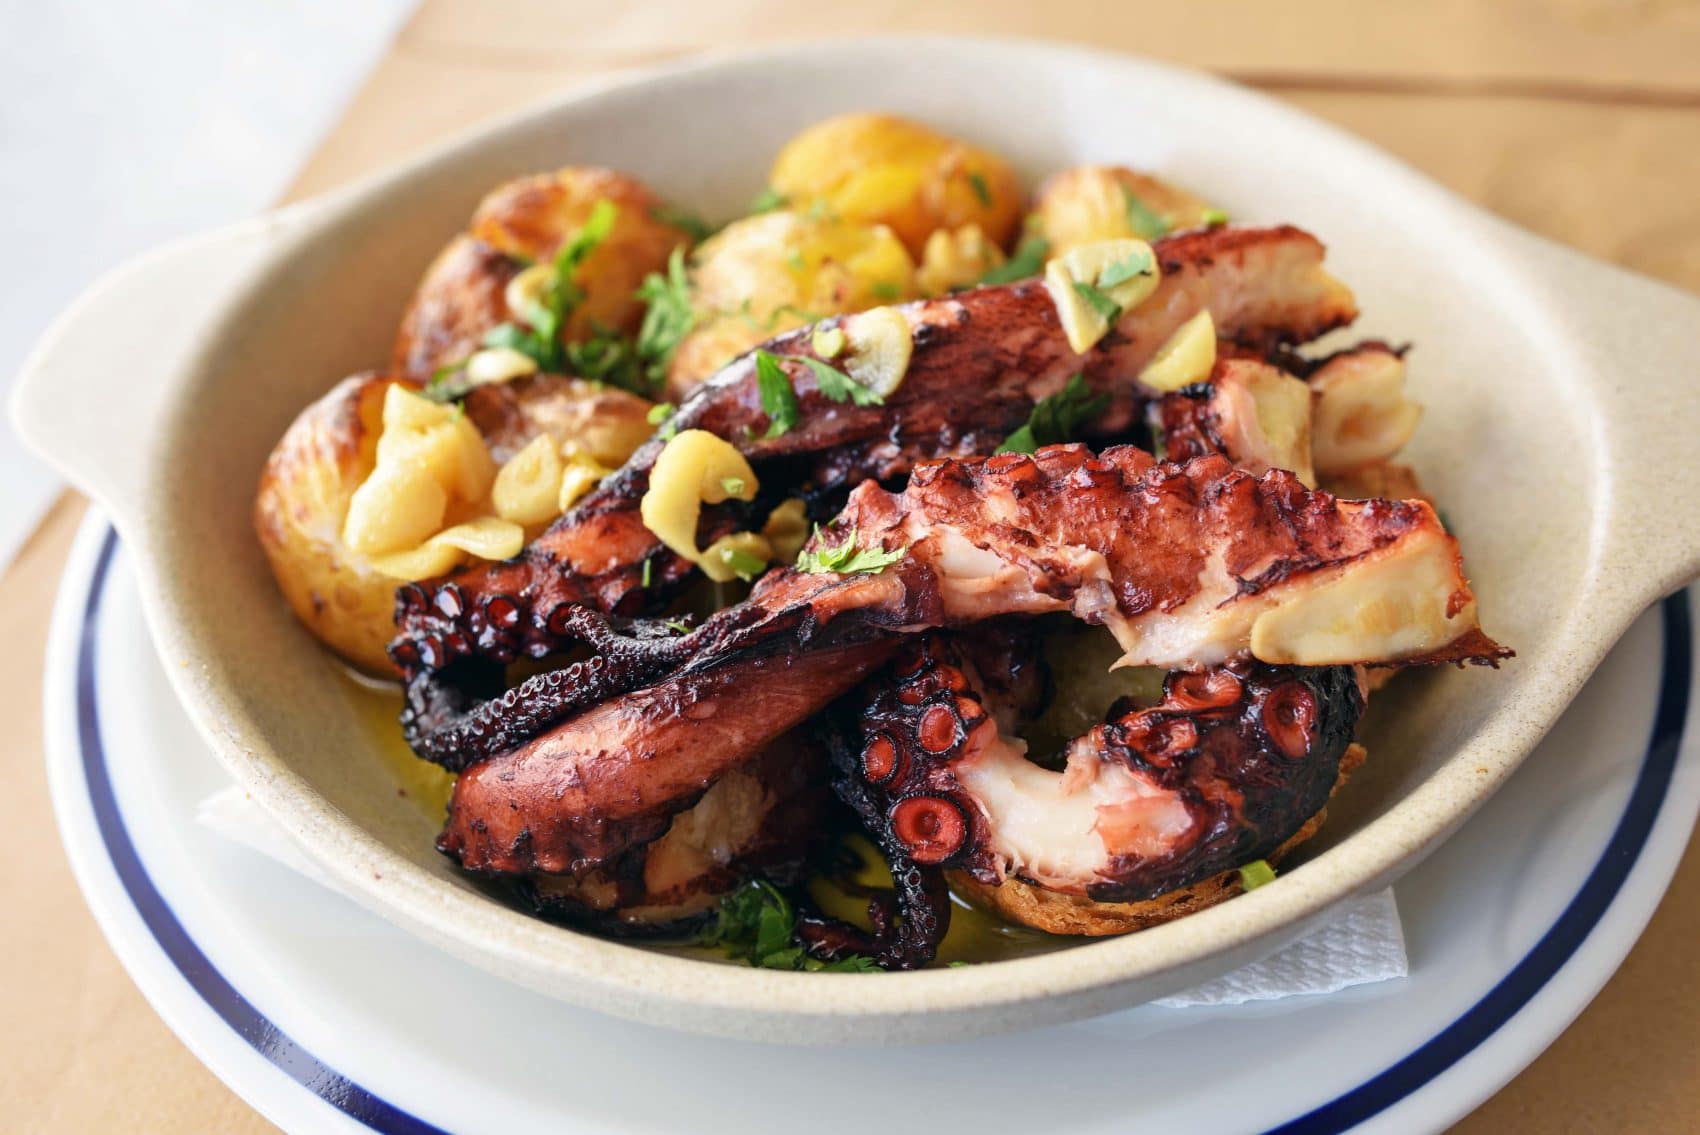 Cooked Octopus with Garlic Yukon Gold Potatoes